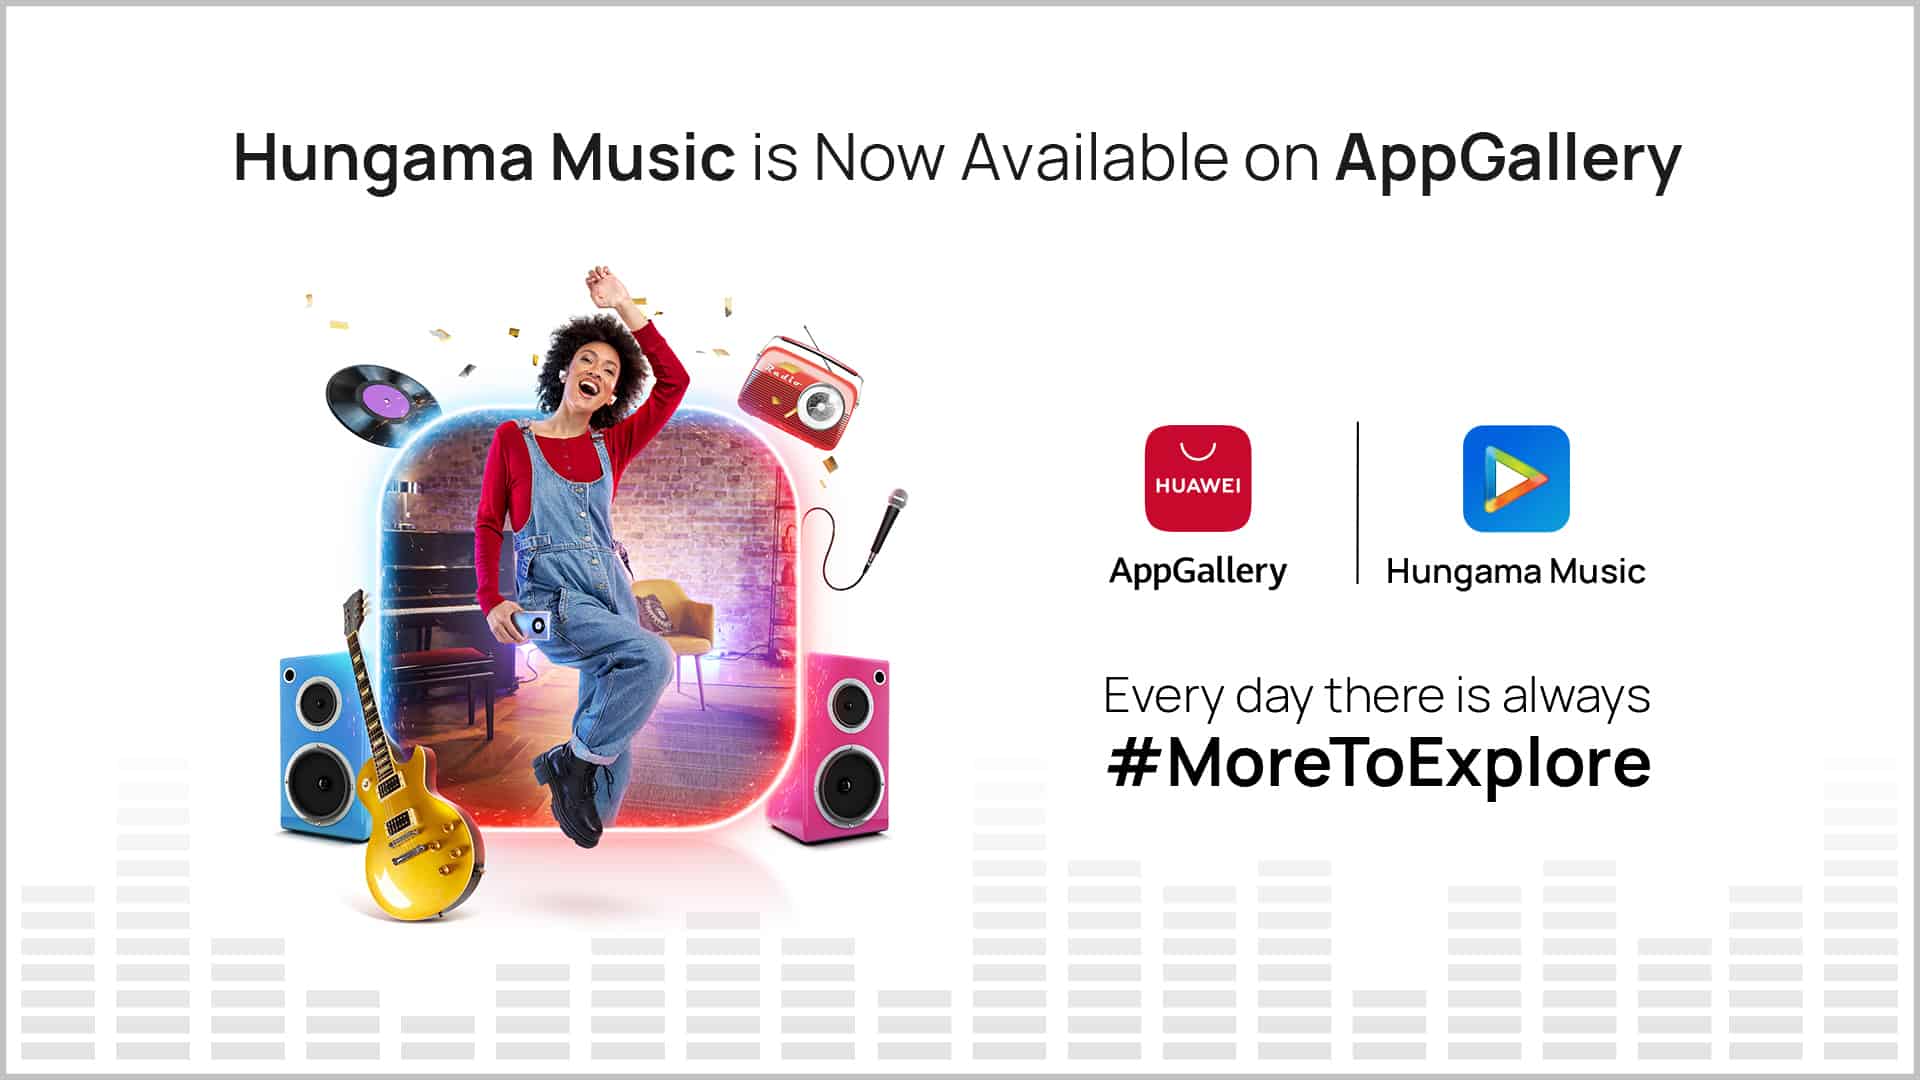 AppGallery partners with Hungama Music, offering additional music streaming options to Huawei users in the UAE